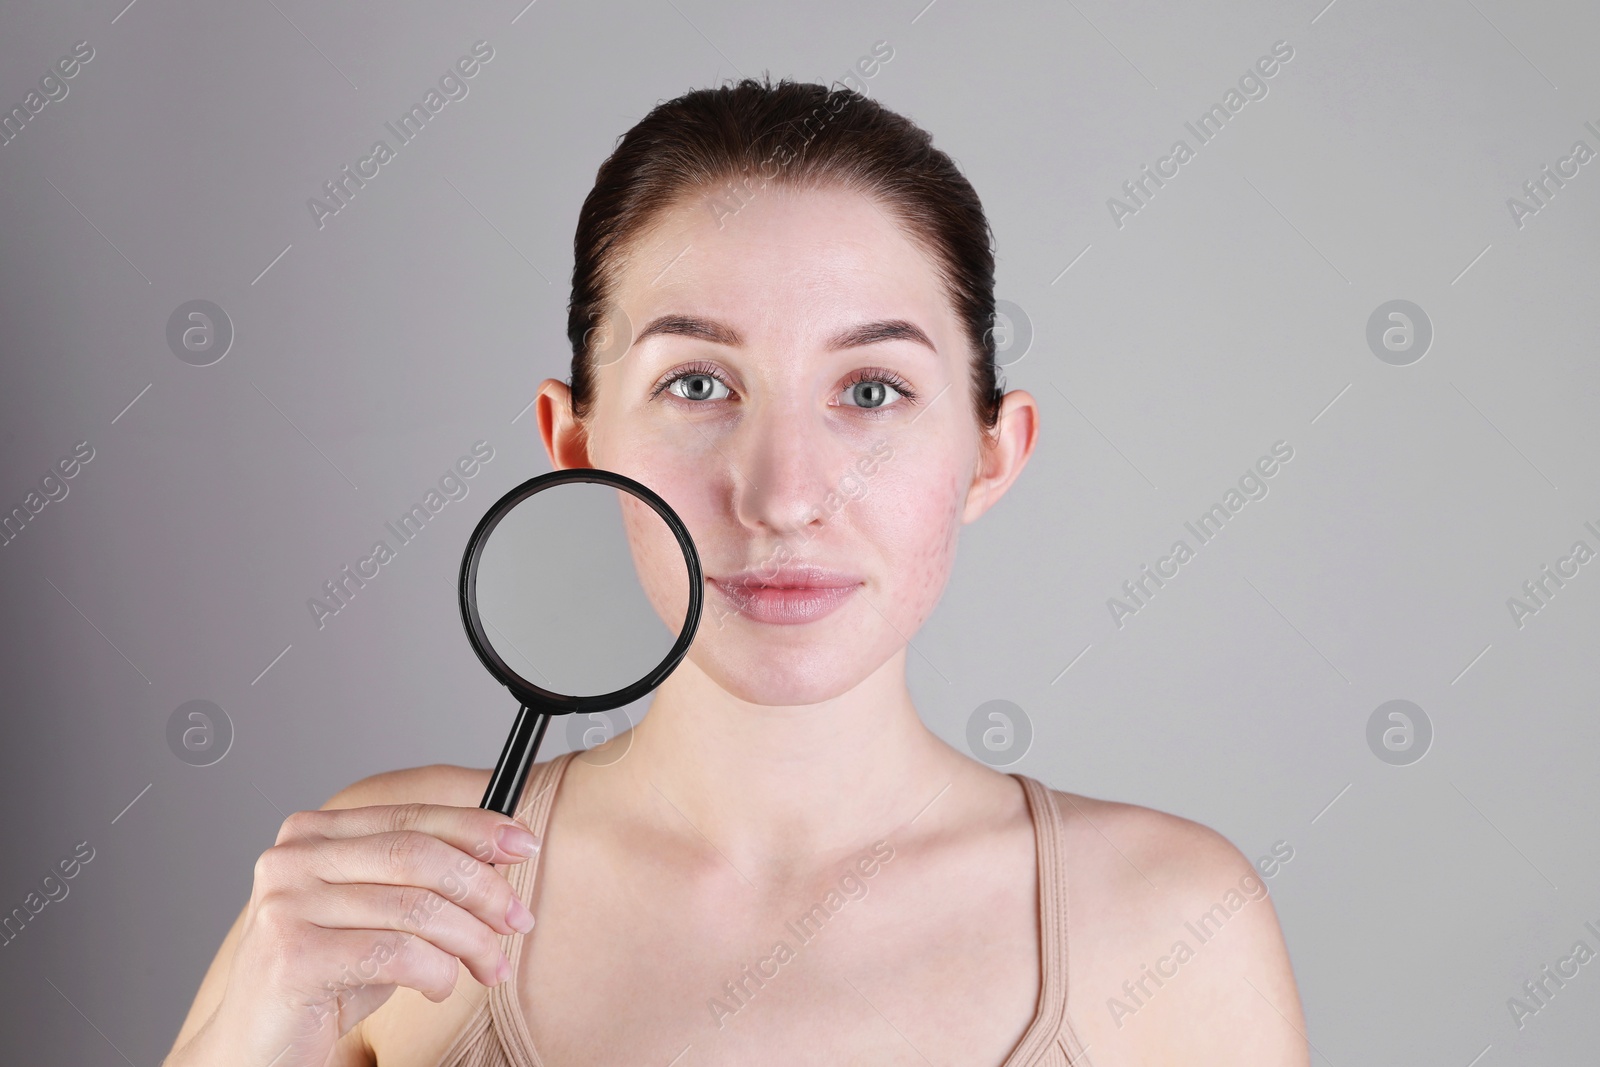 Photo of Young woman with acne problem holding magnifying glass near her skin on light grey background